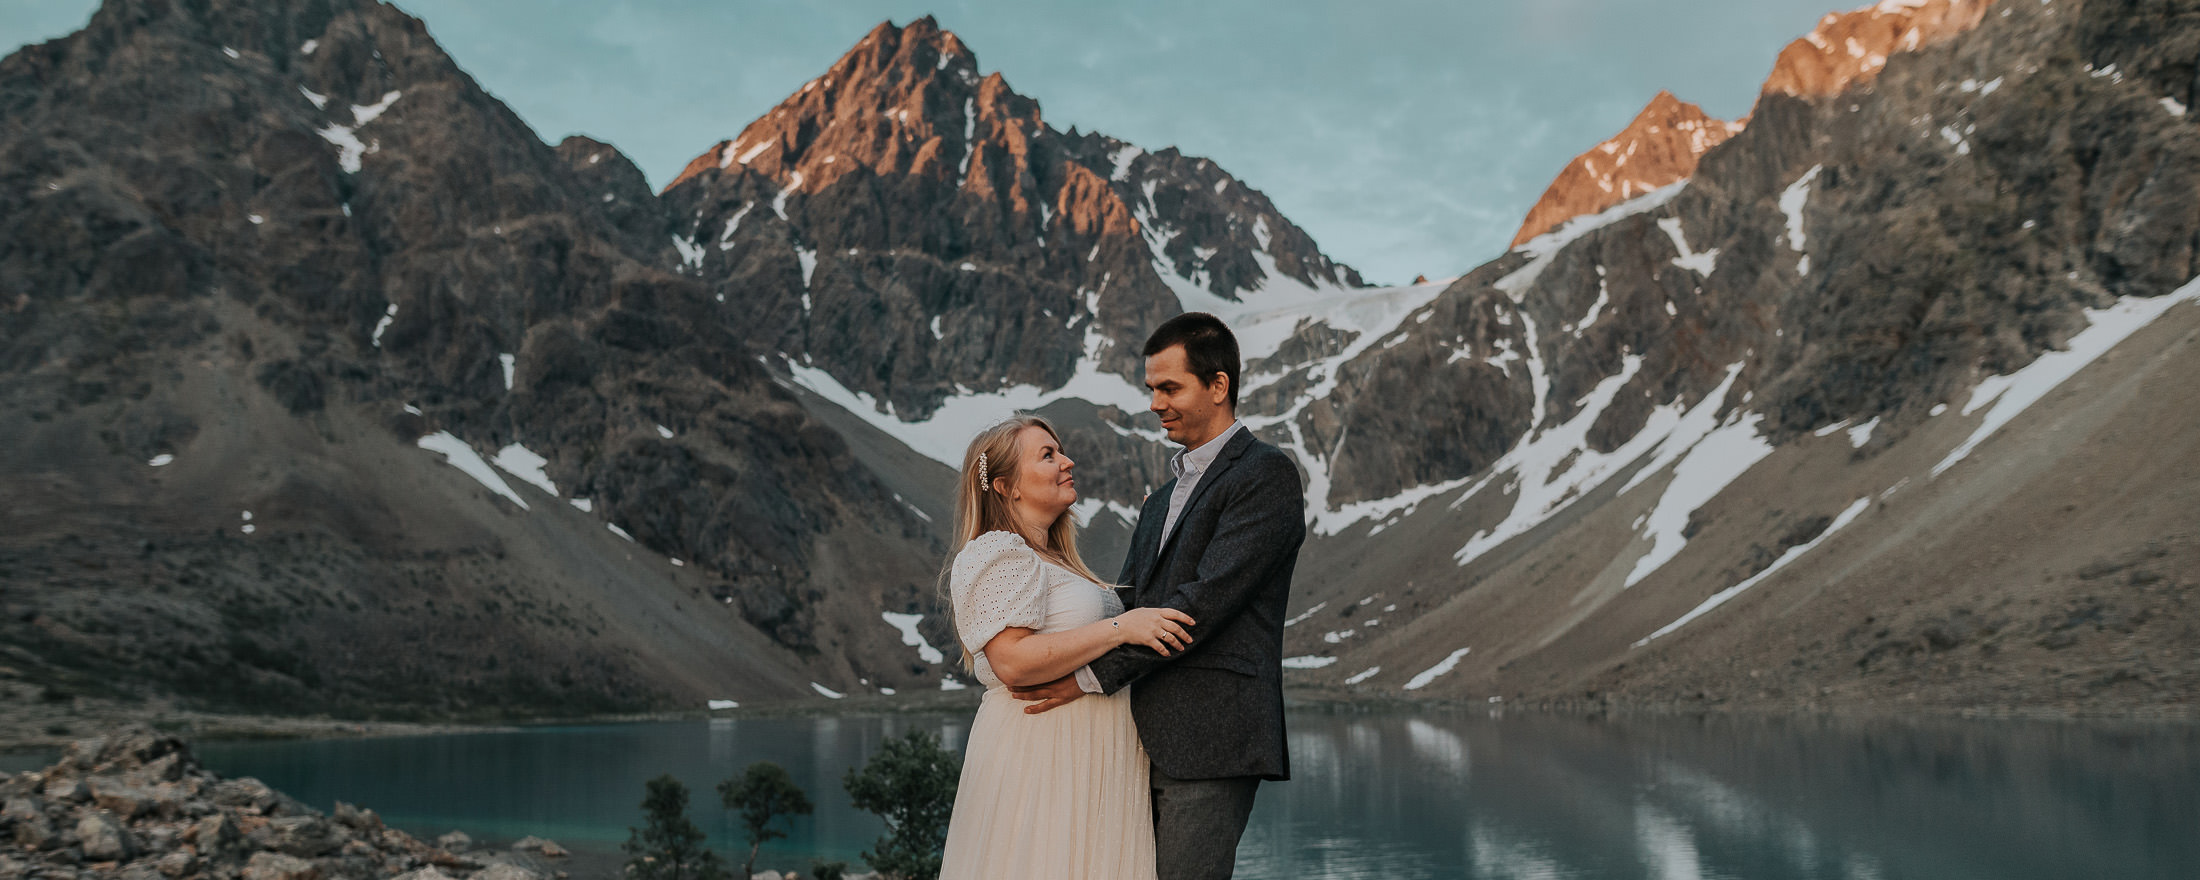 Pre-wedding in Norway in Lyngen Alps - bride and groom kissing in front of glacial lake and mountains